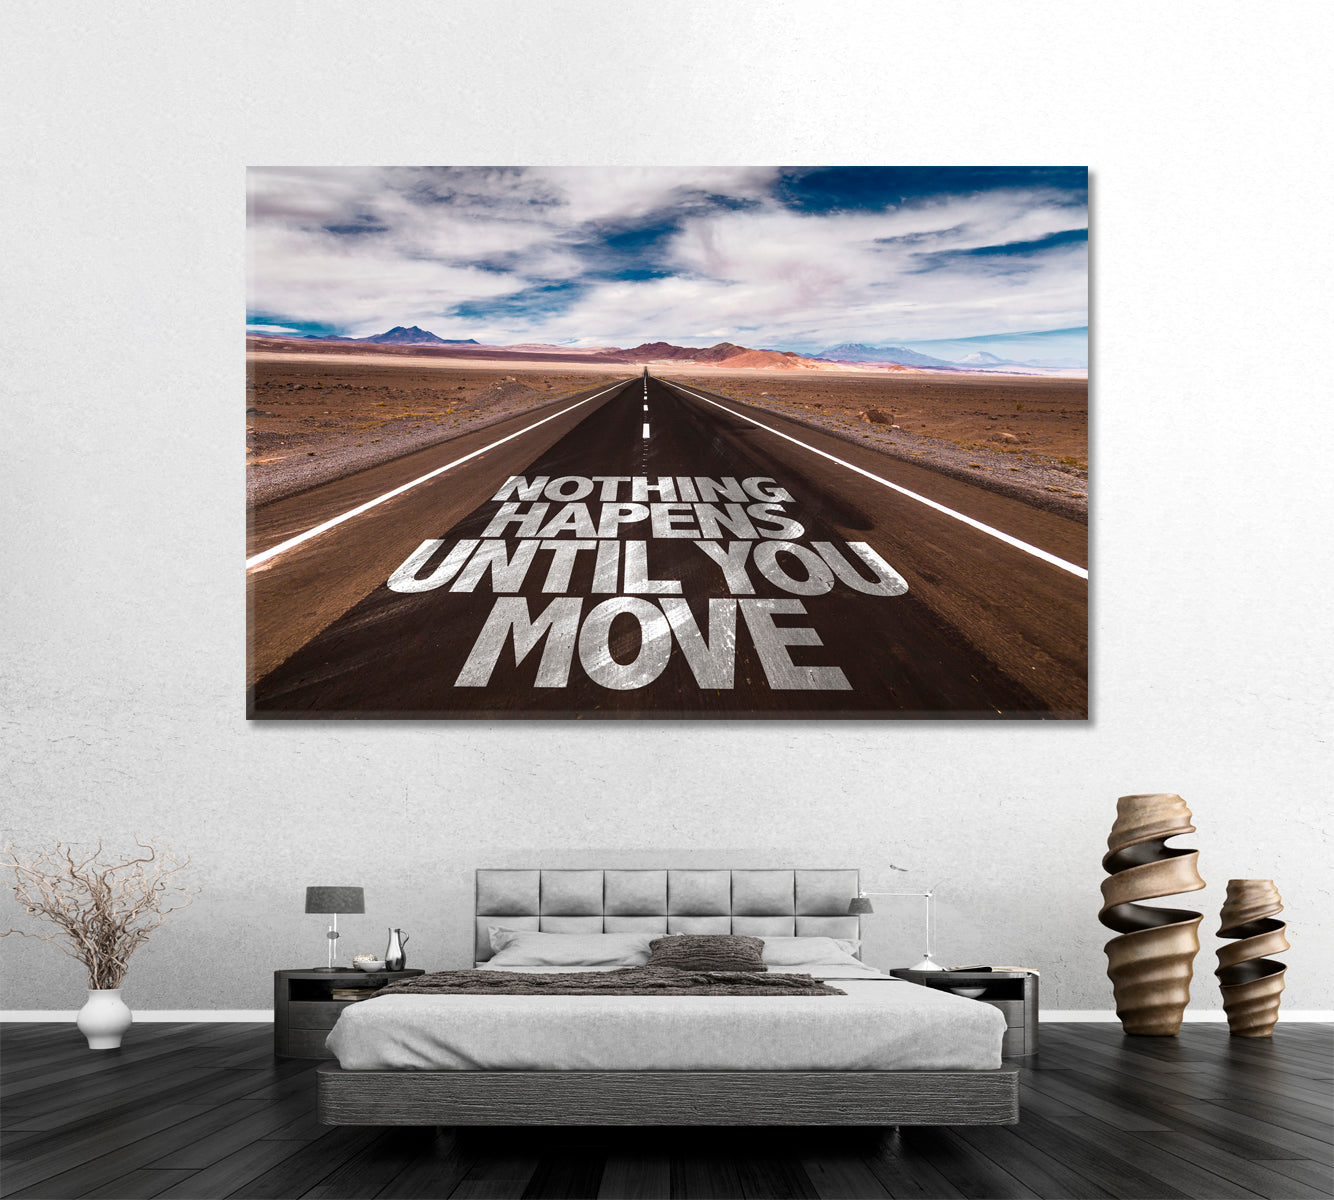 NOTHING HAPPENS UNTIL YOU MOVE  Desert Road Motivation Poster Office Wall Decor Office Wall Art Canvas Print Artesty 1 panel 24" x 16" 